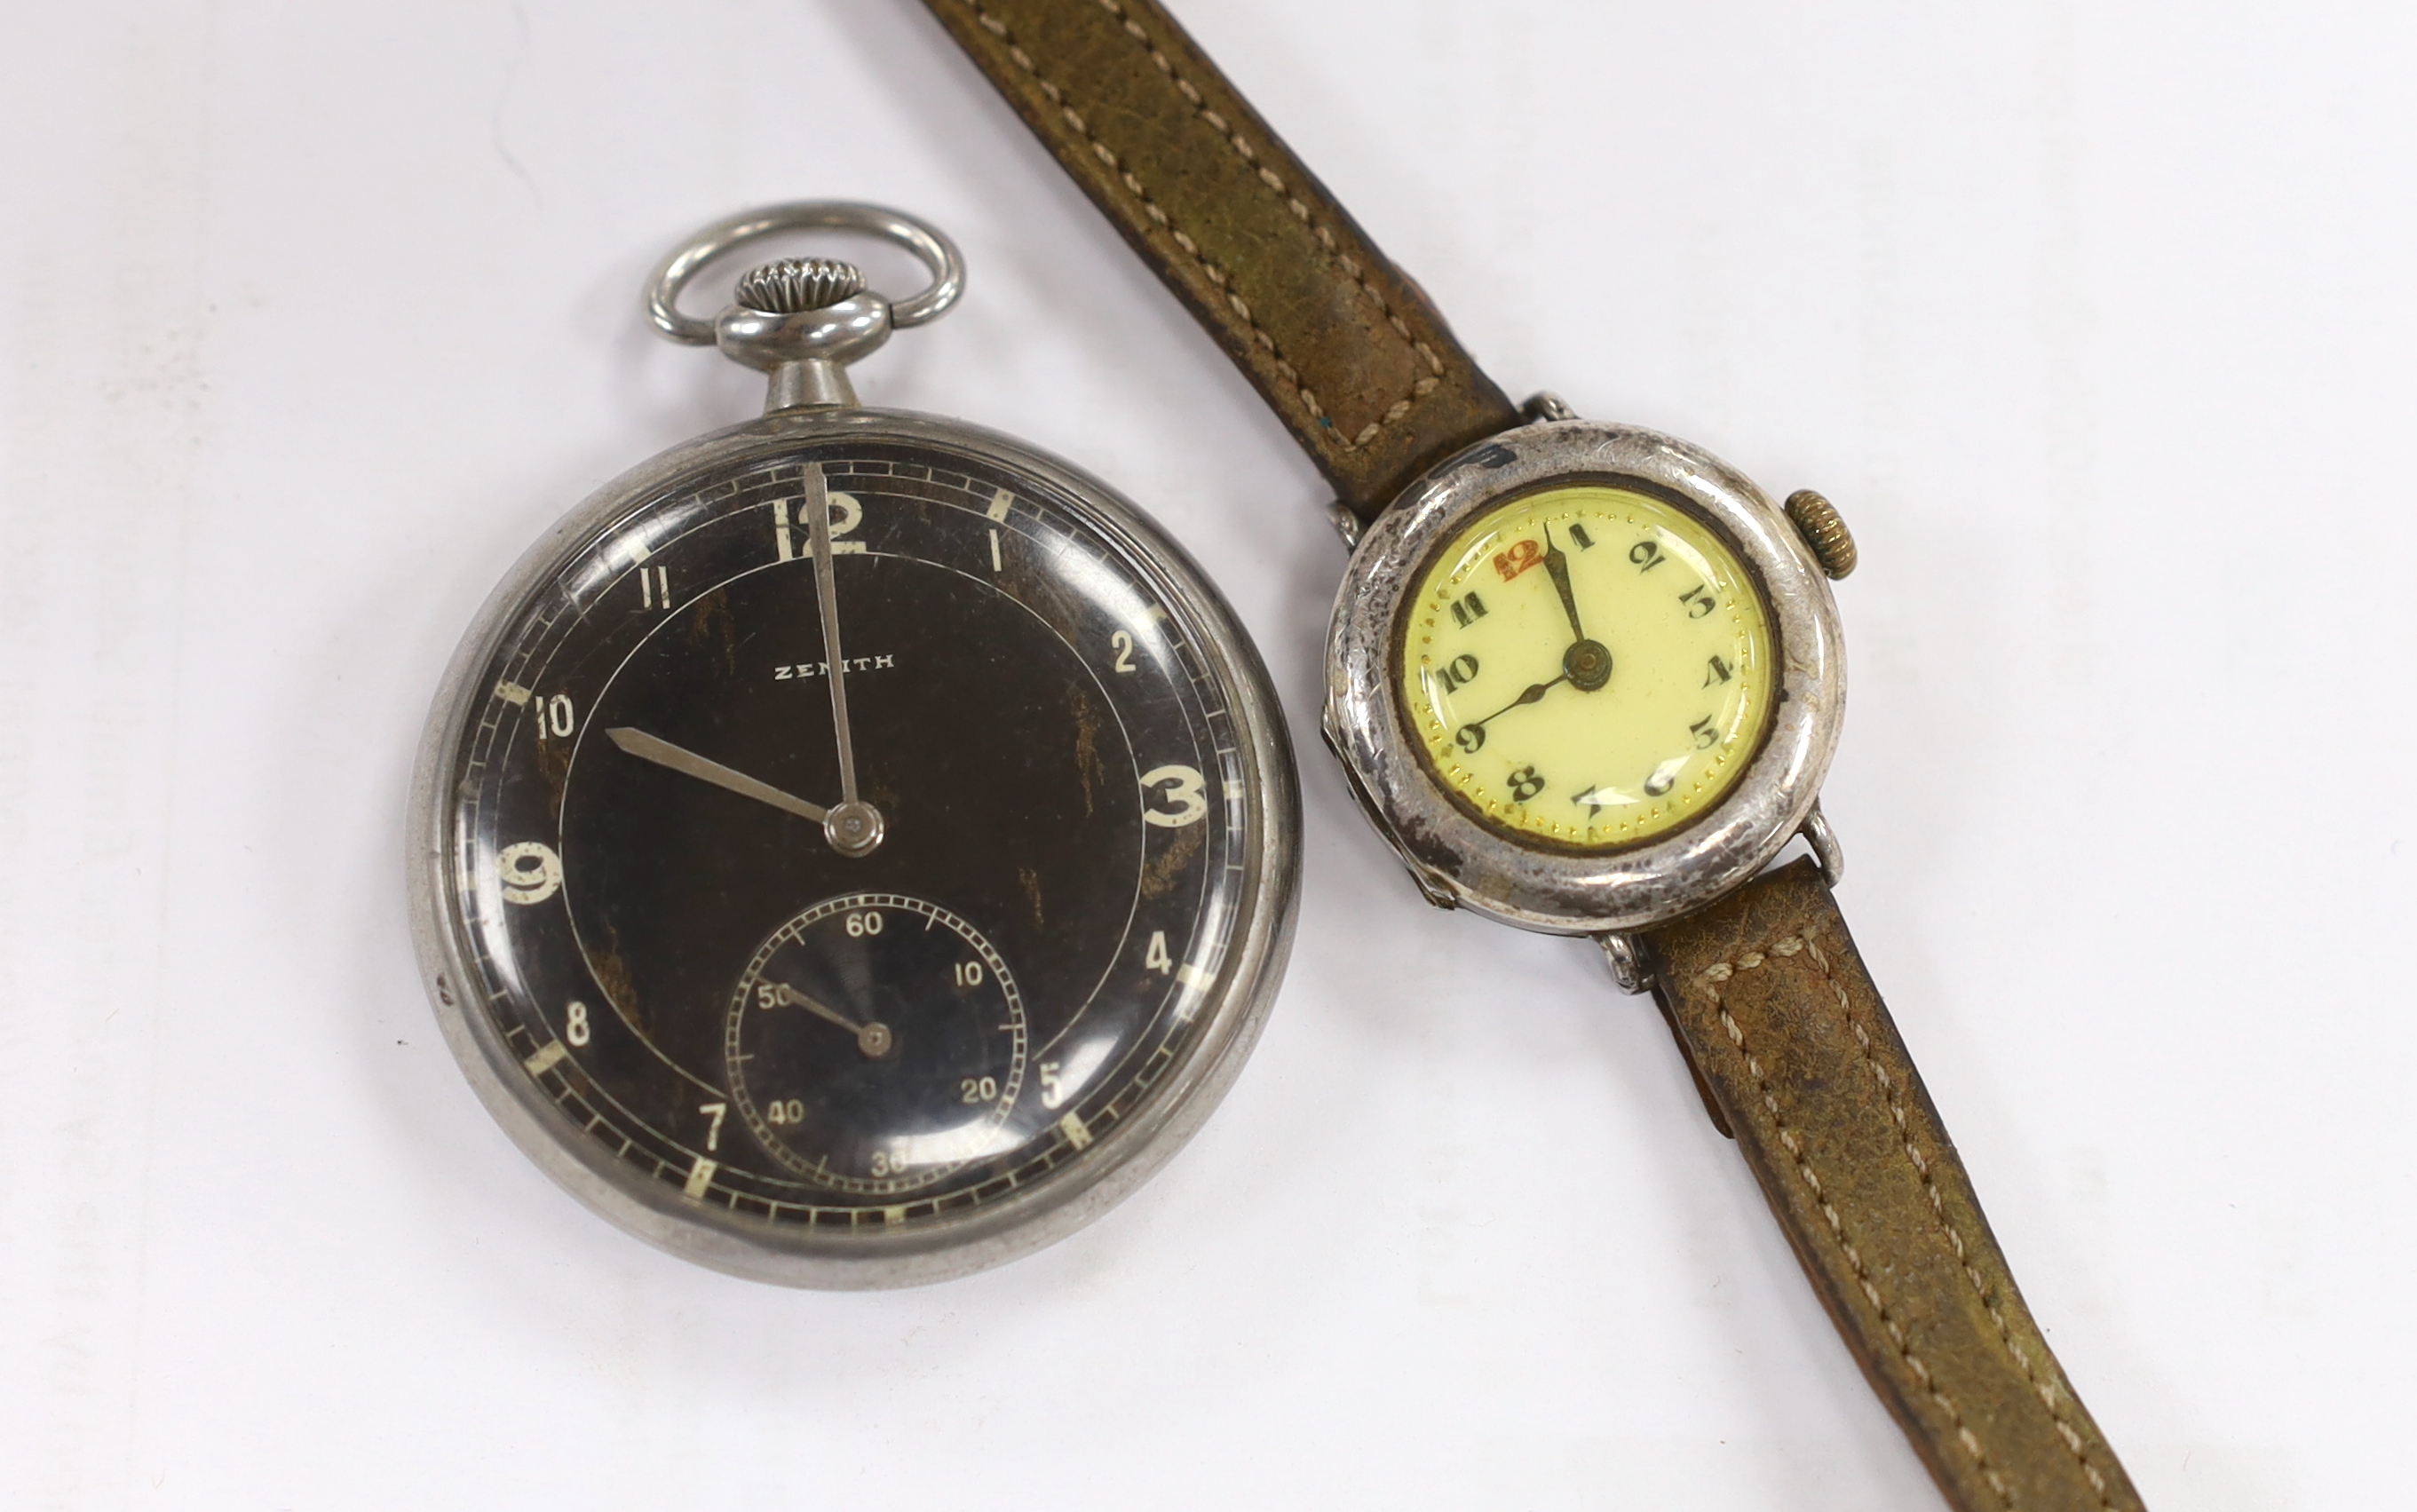 A chromium cased Zenith black dial keyless pocket watch and a silver wrist watch.